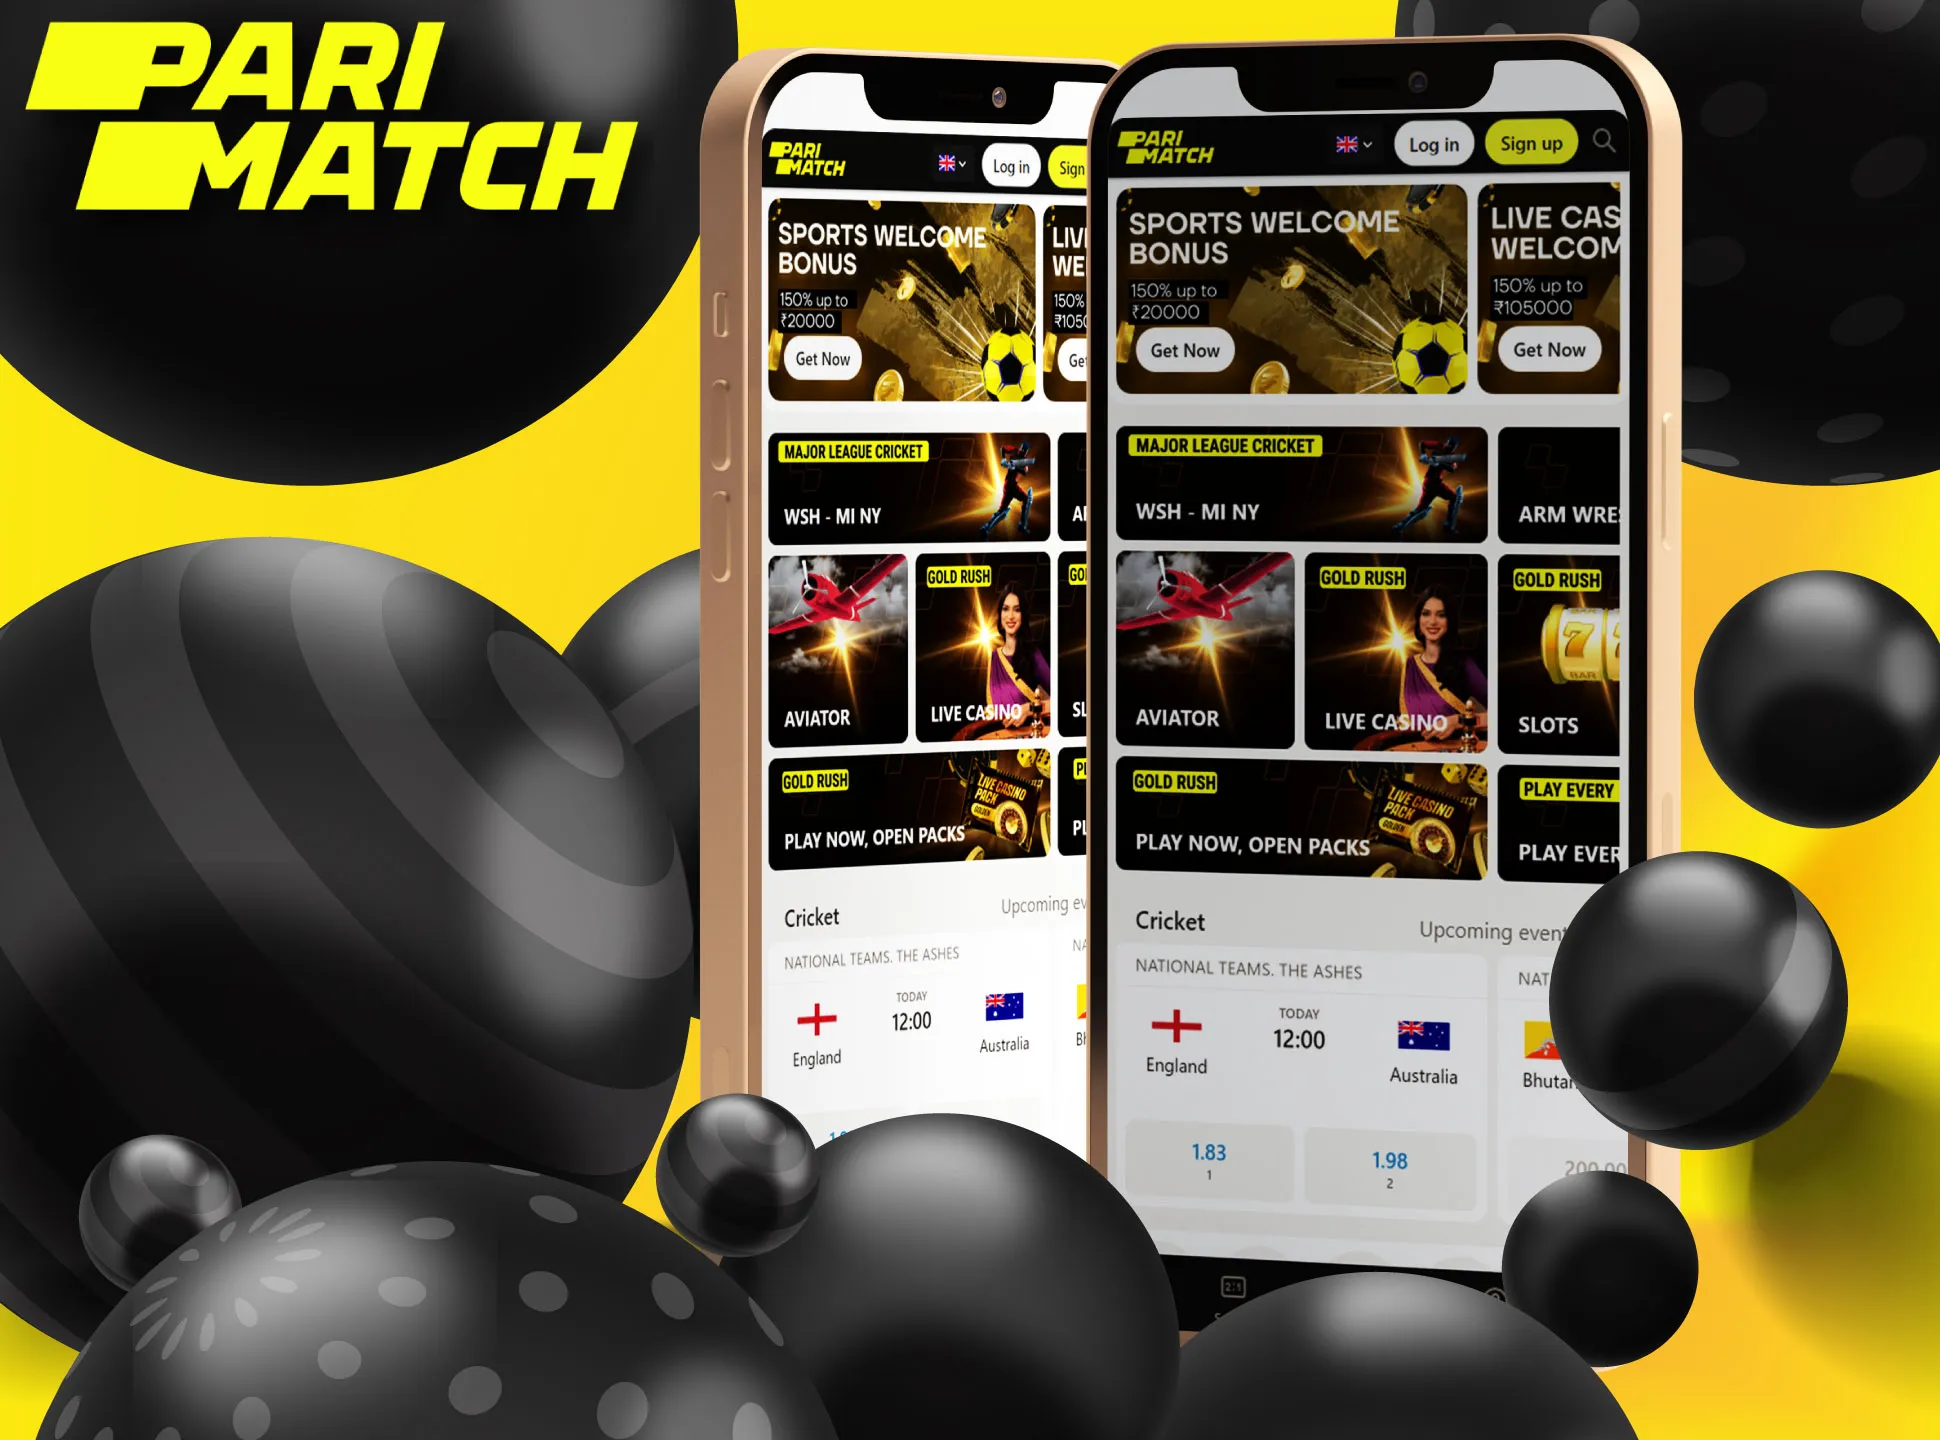 You don't have to download the app if you want to use the mobile version of the Parimatch website.